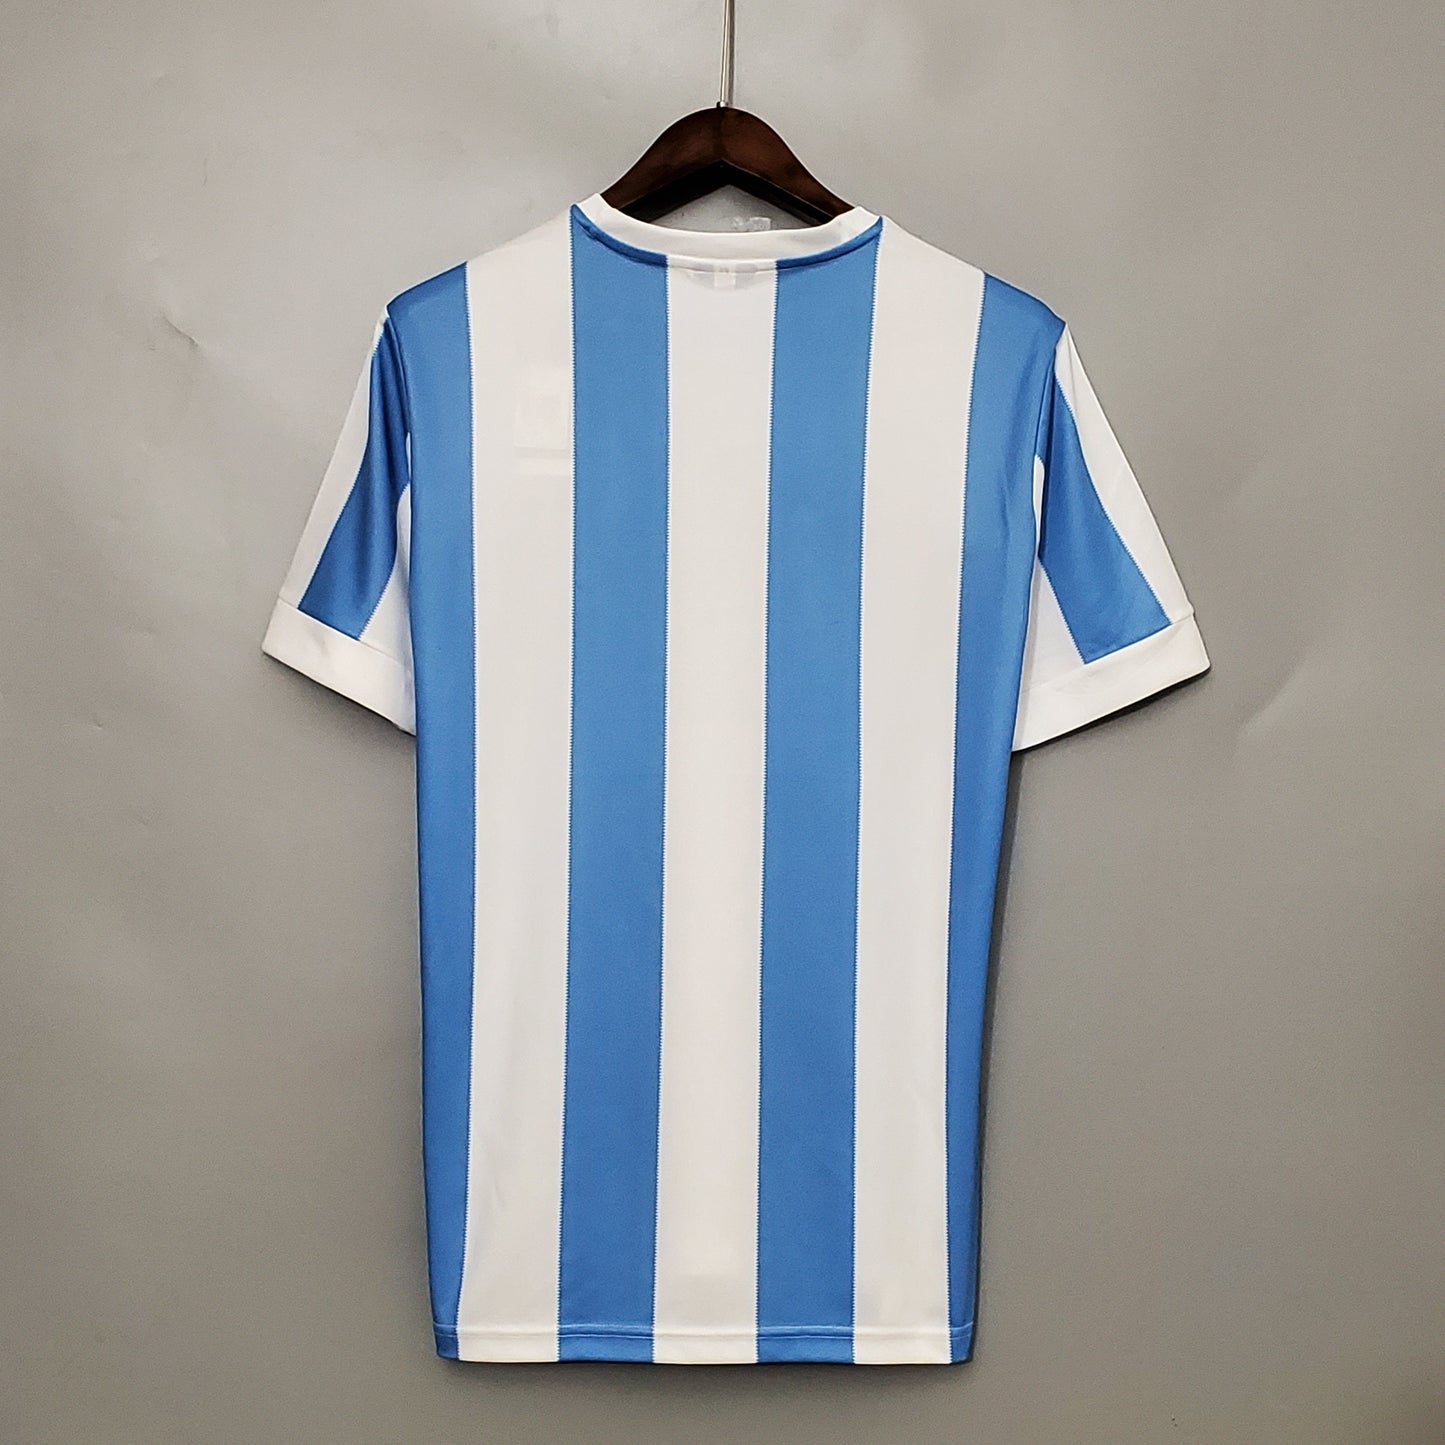 Argentina 1978 HOME JERSEY